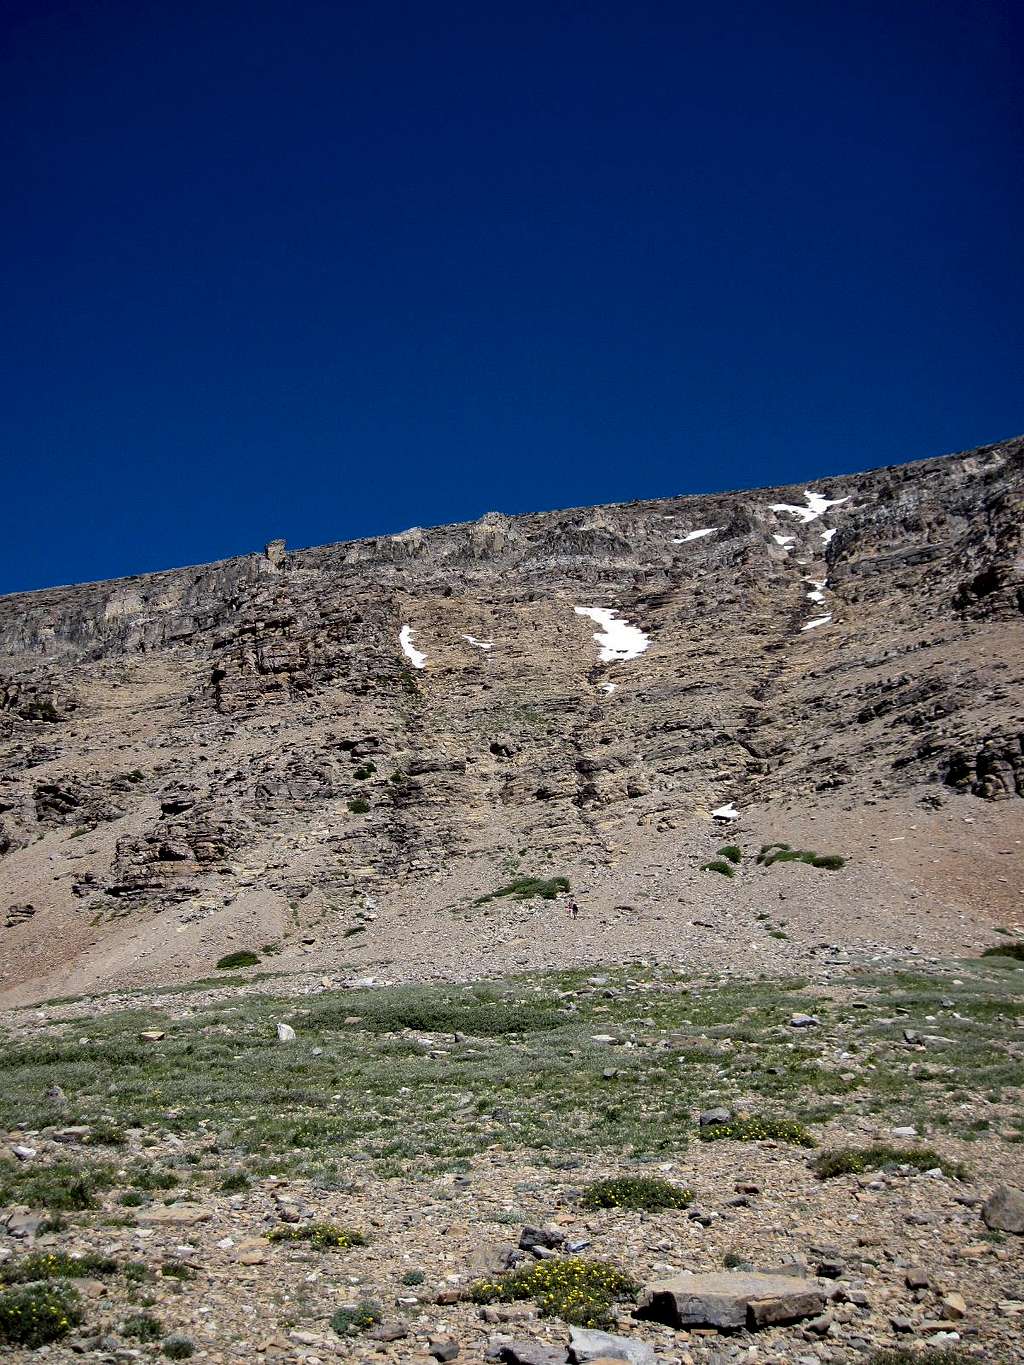 The south face of Siyeh